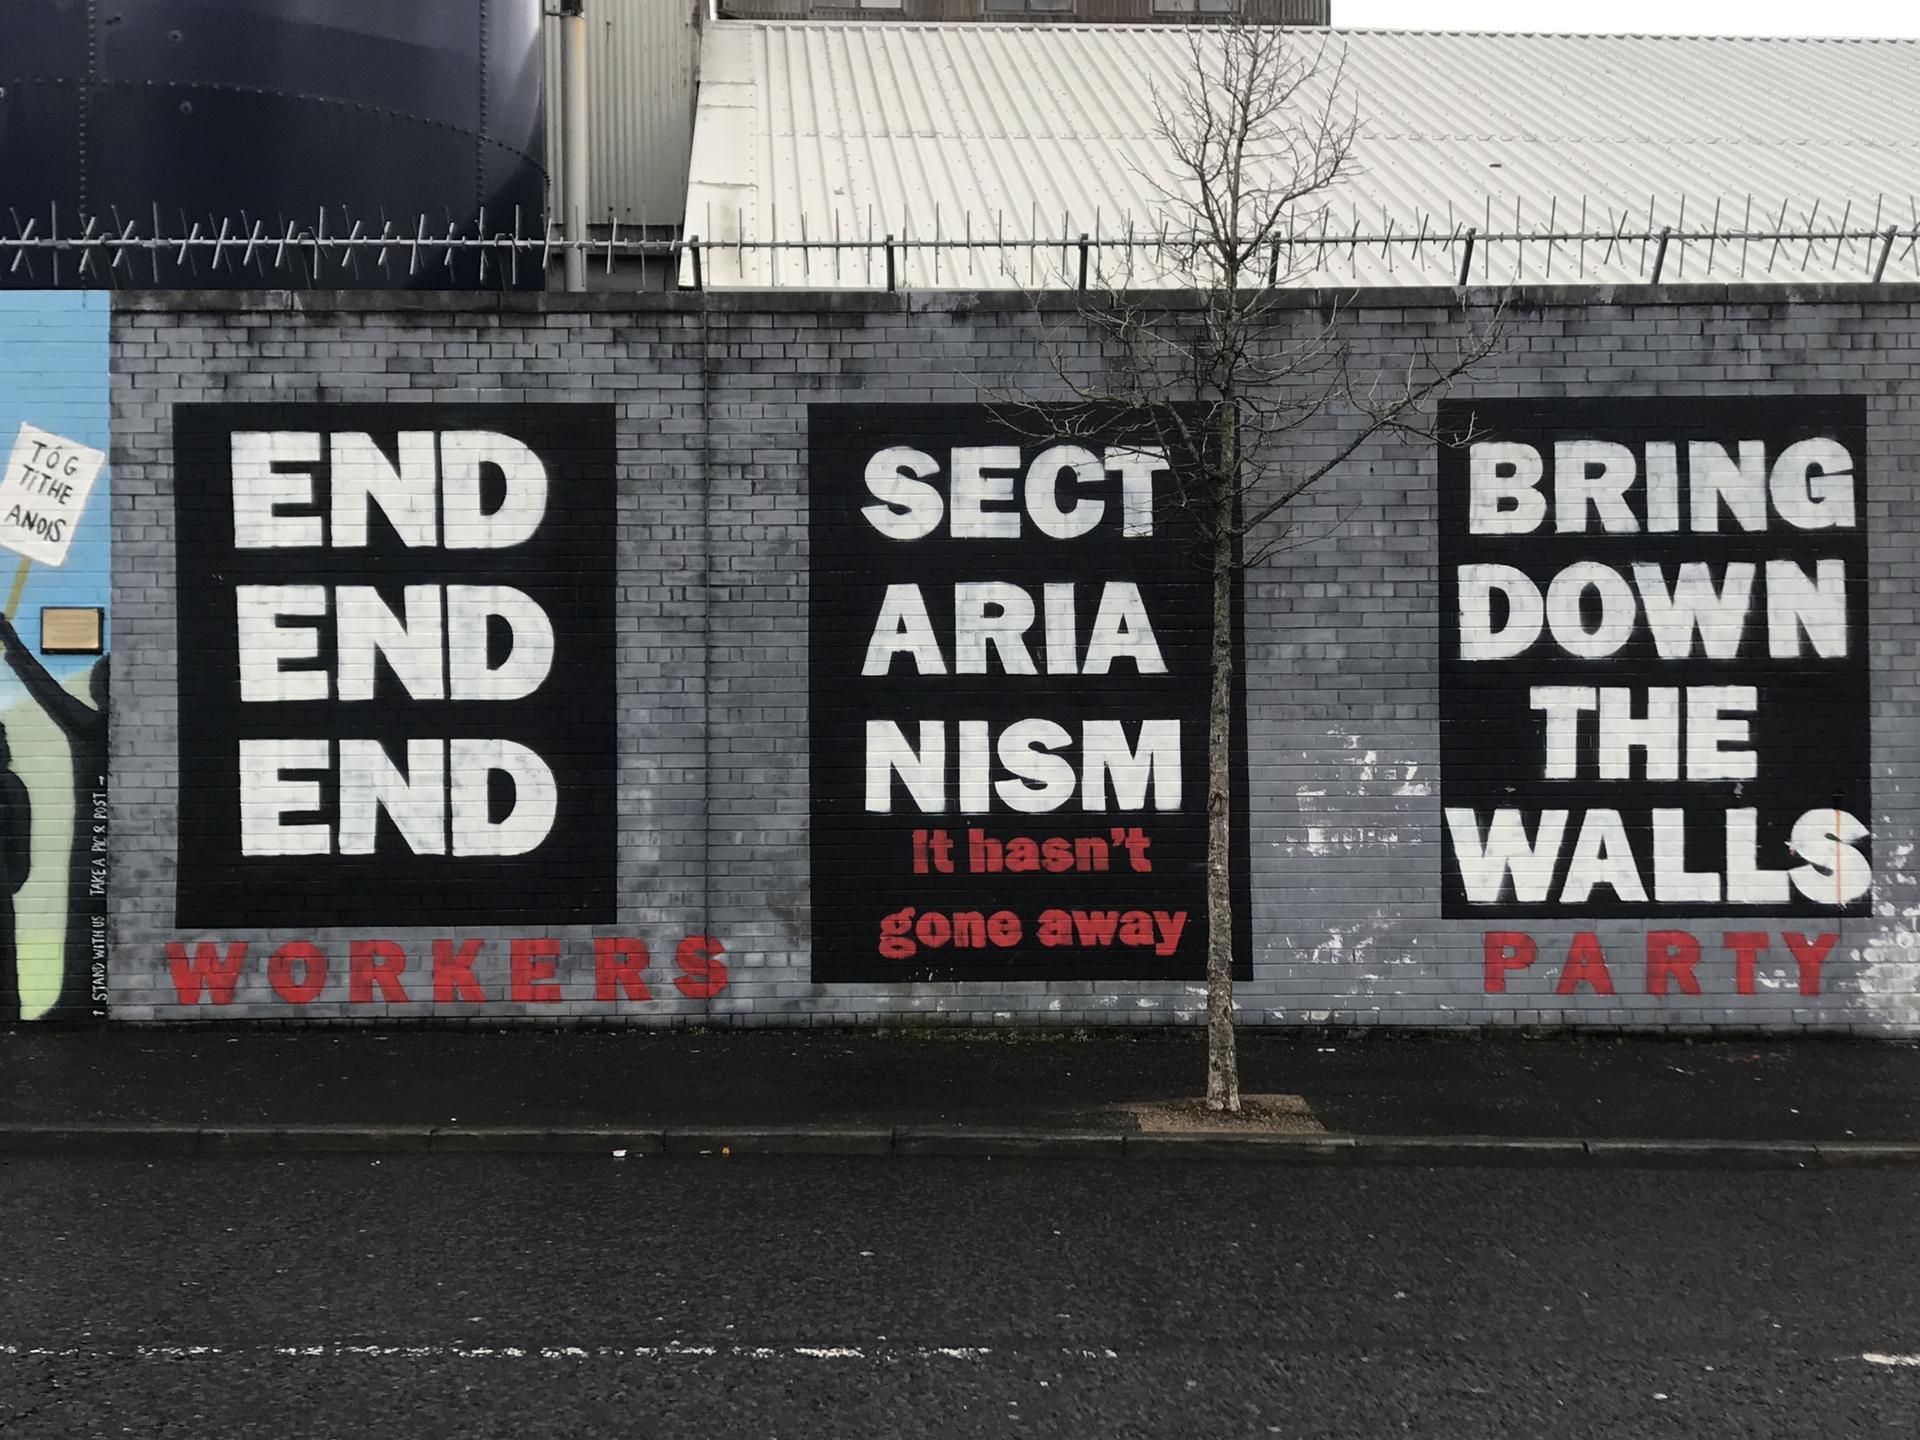 A mural shows messages related to ending sectarianism and taking down walls in Belfast, Northern Ireland. 